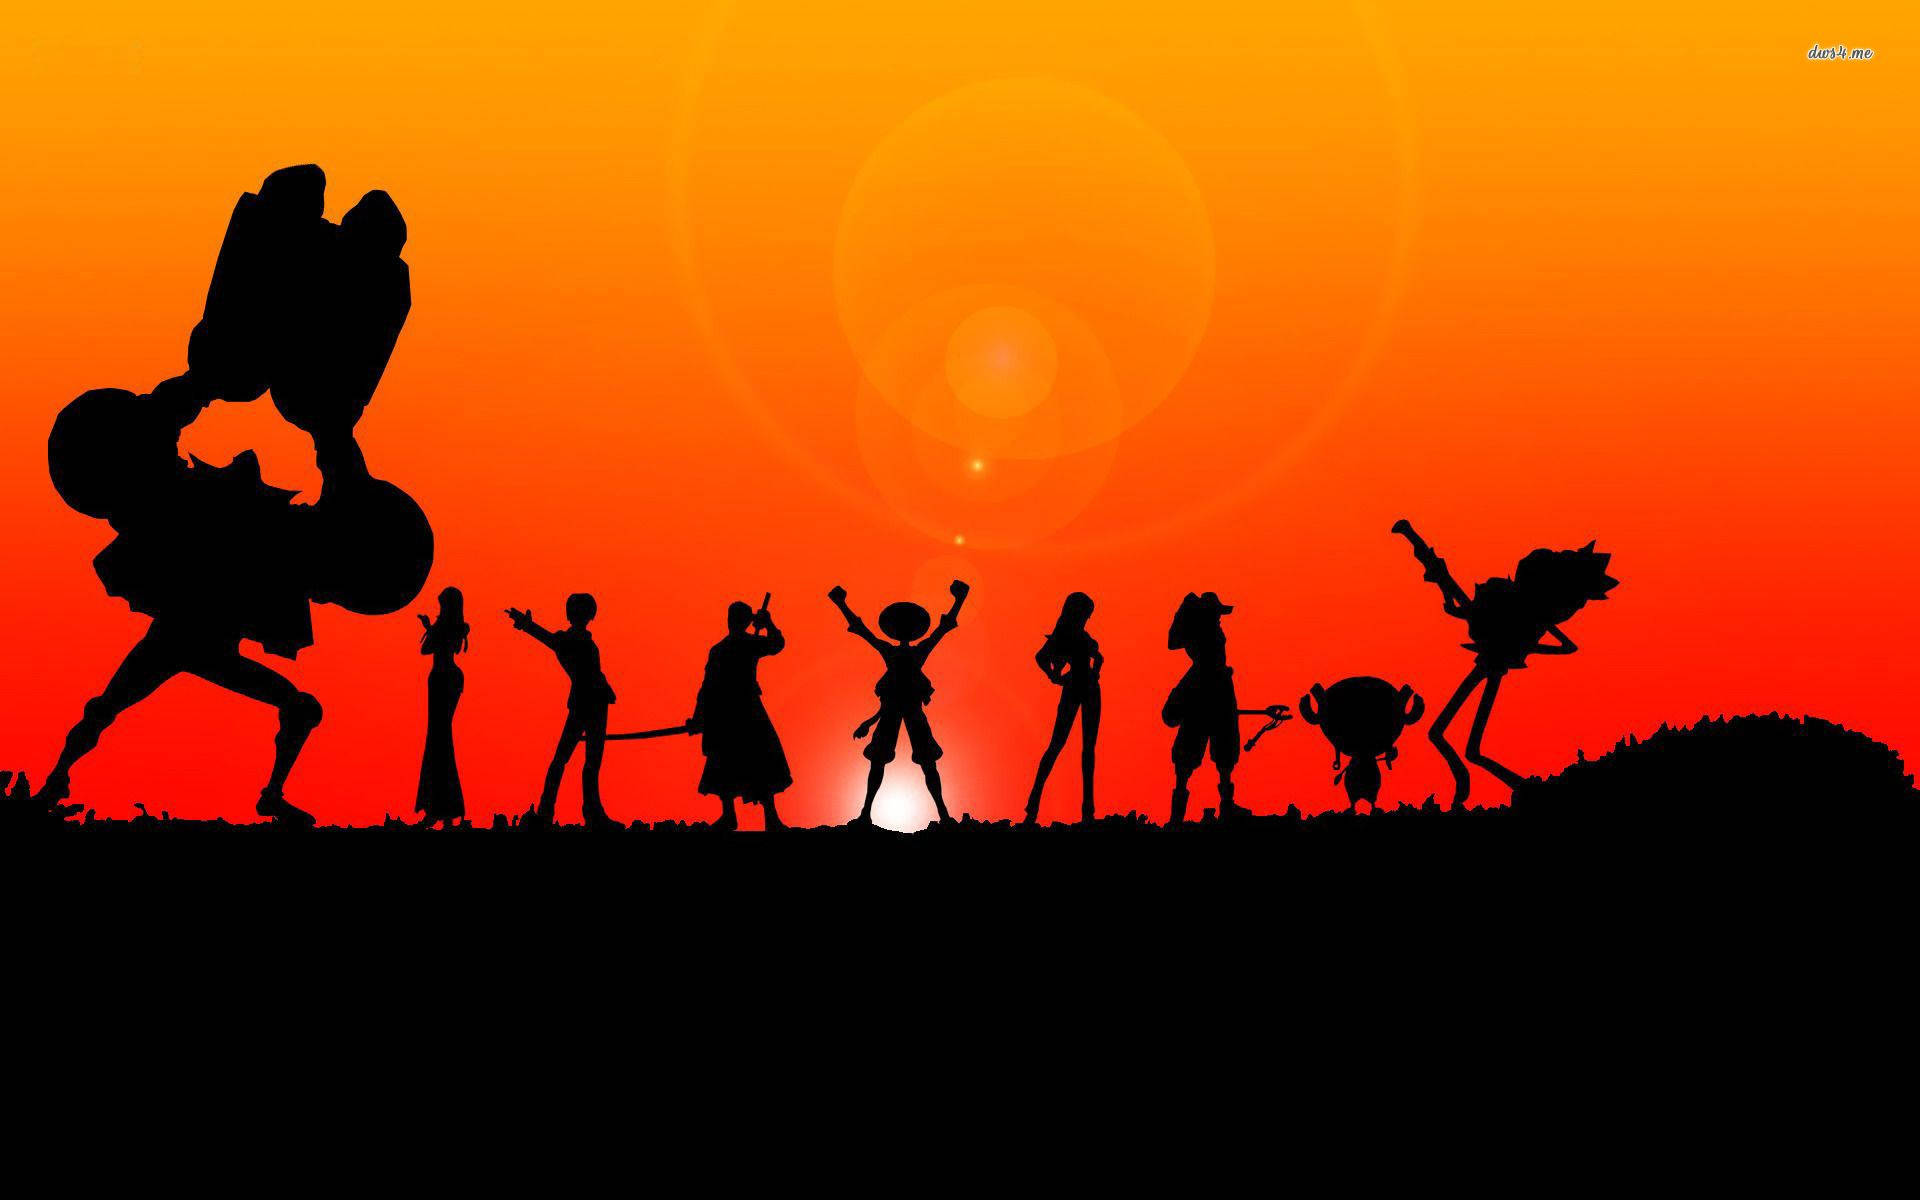 One Piece Characters Silhouette In Sunset